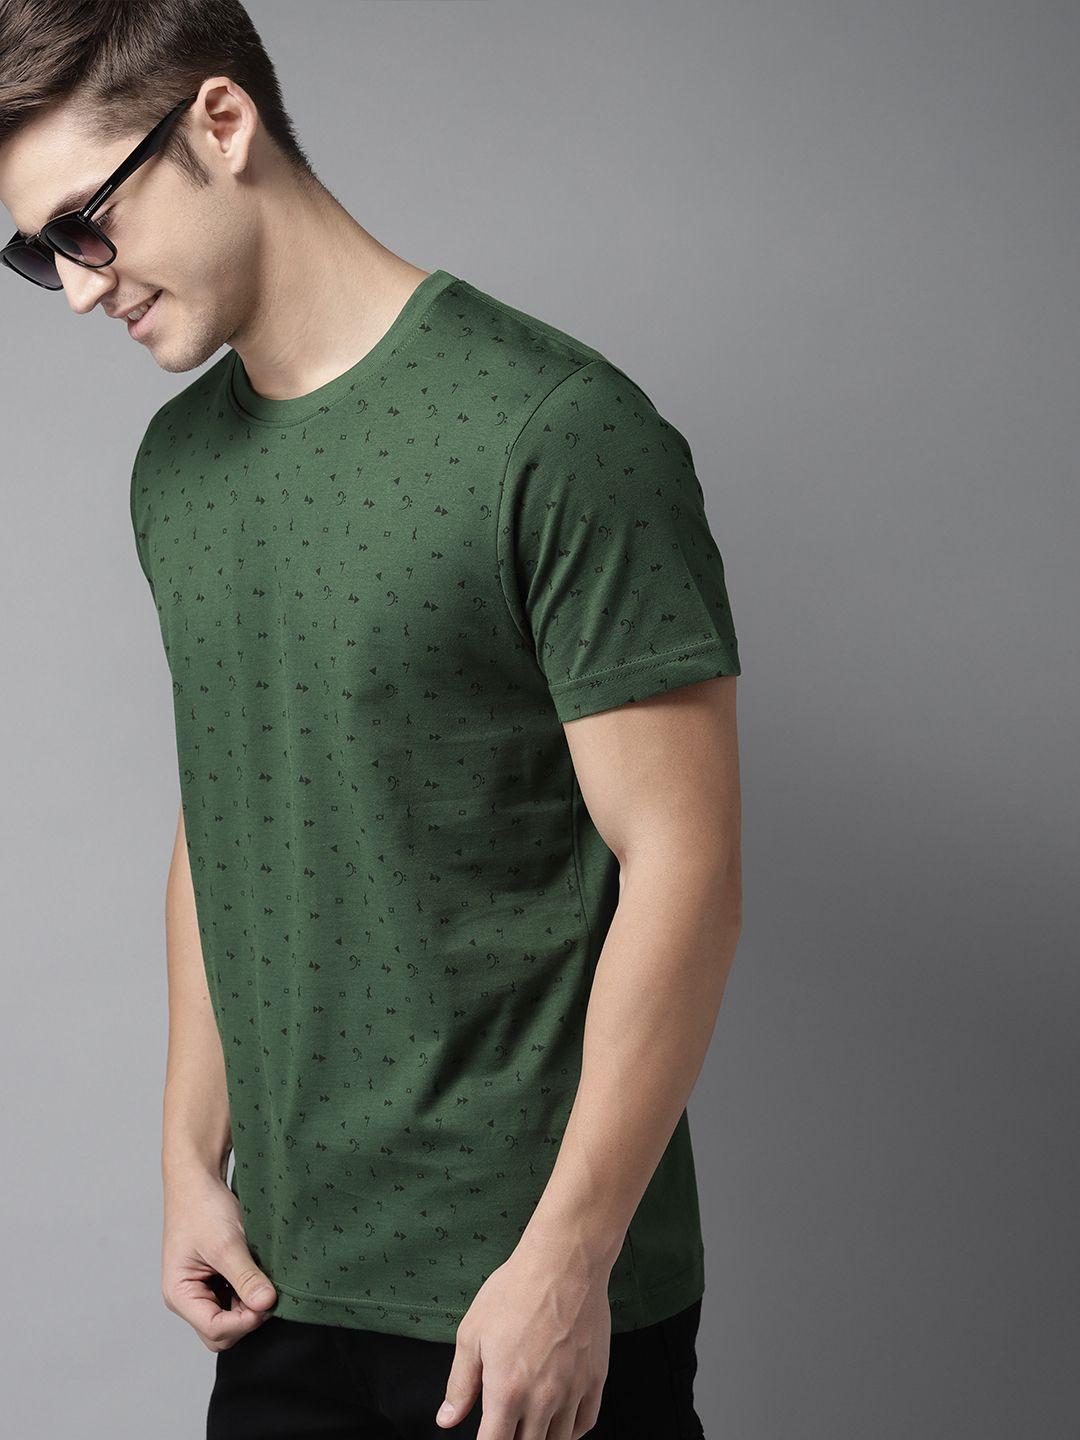 here&now men green printed round neck t-shirt